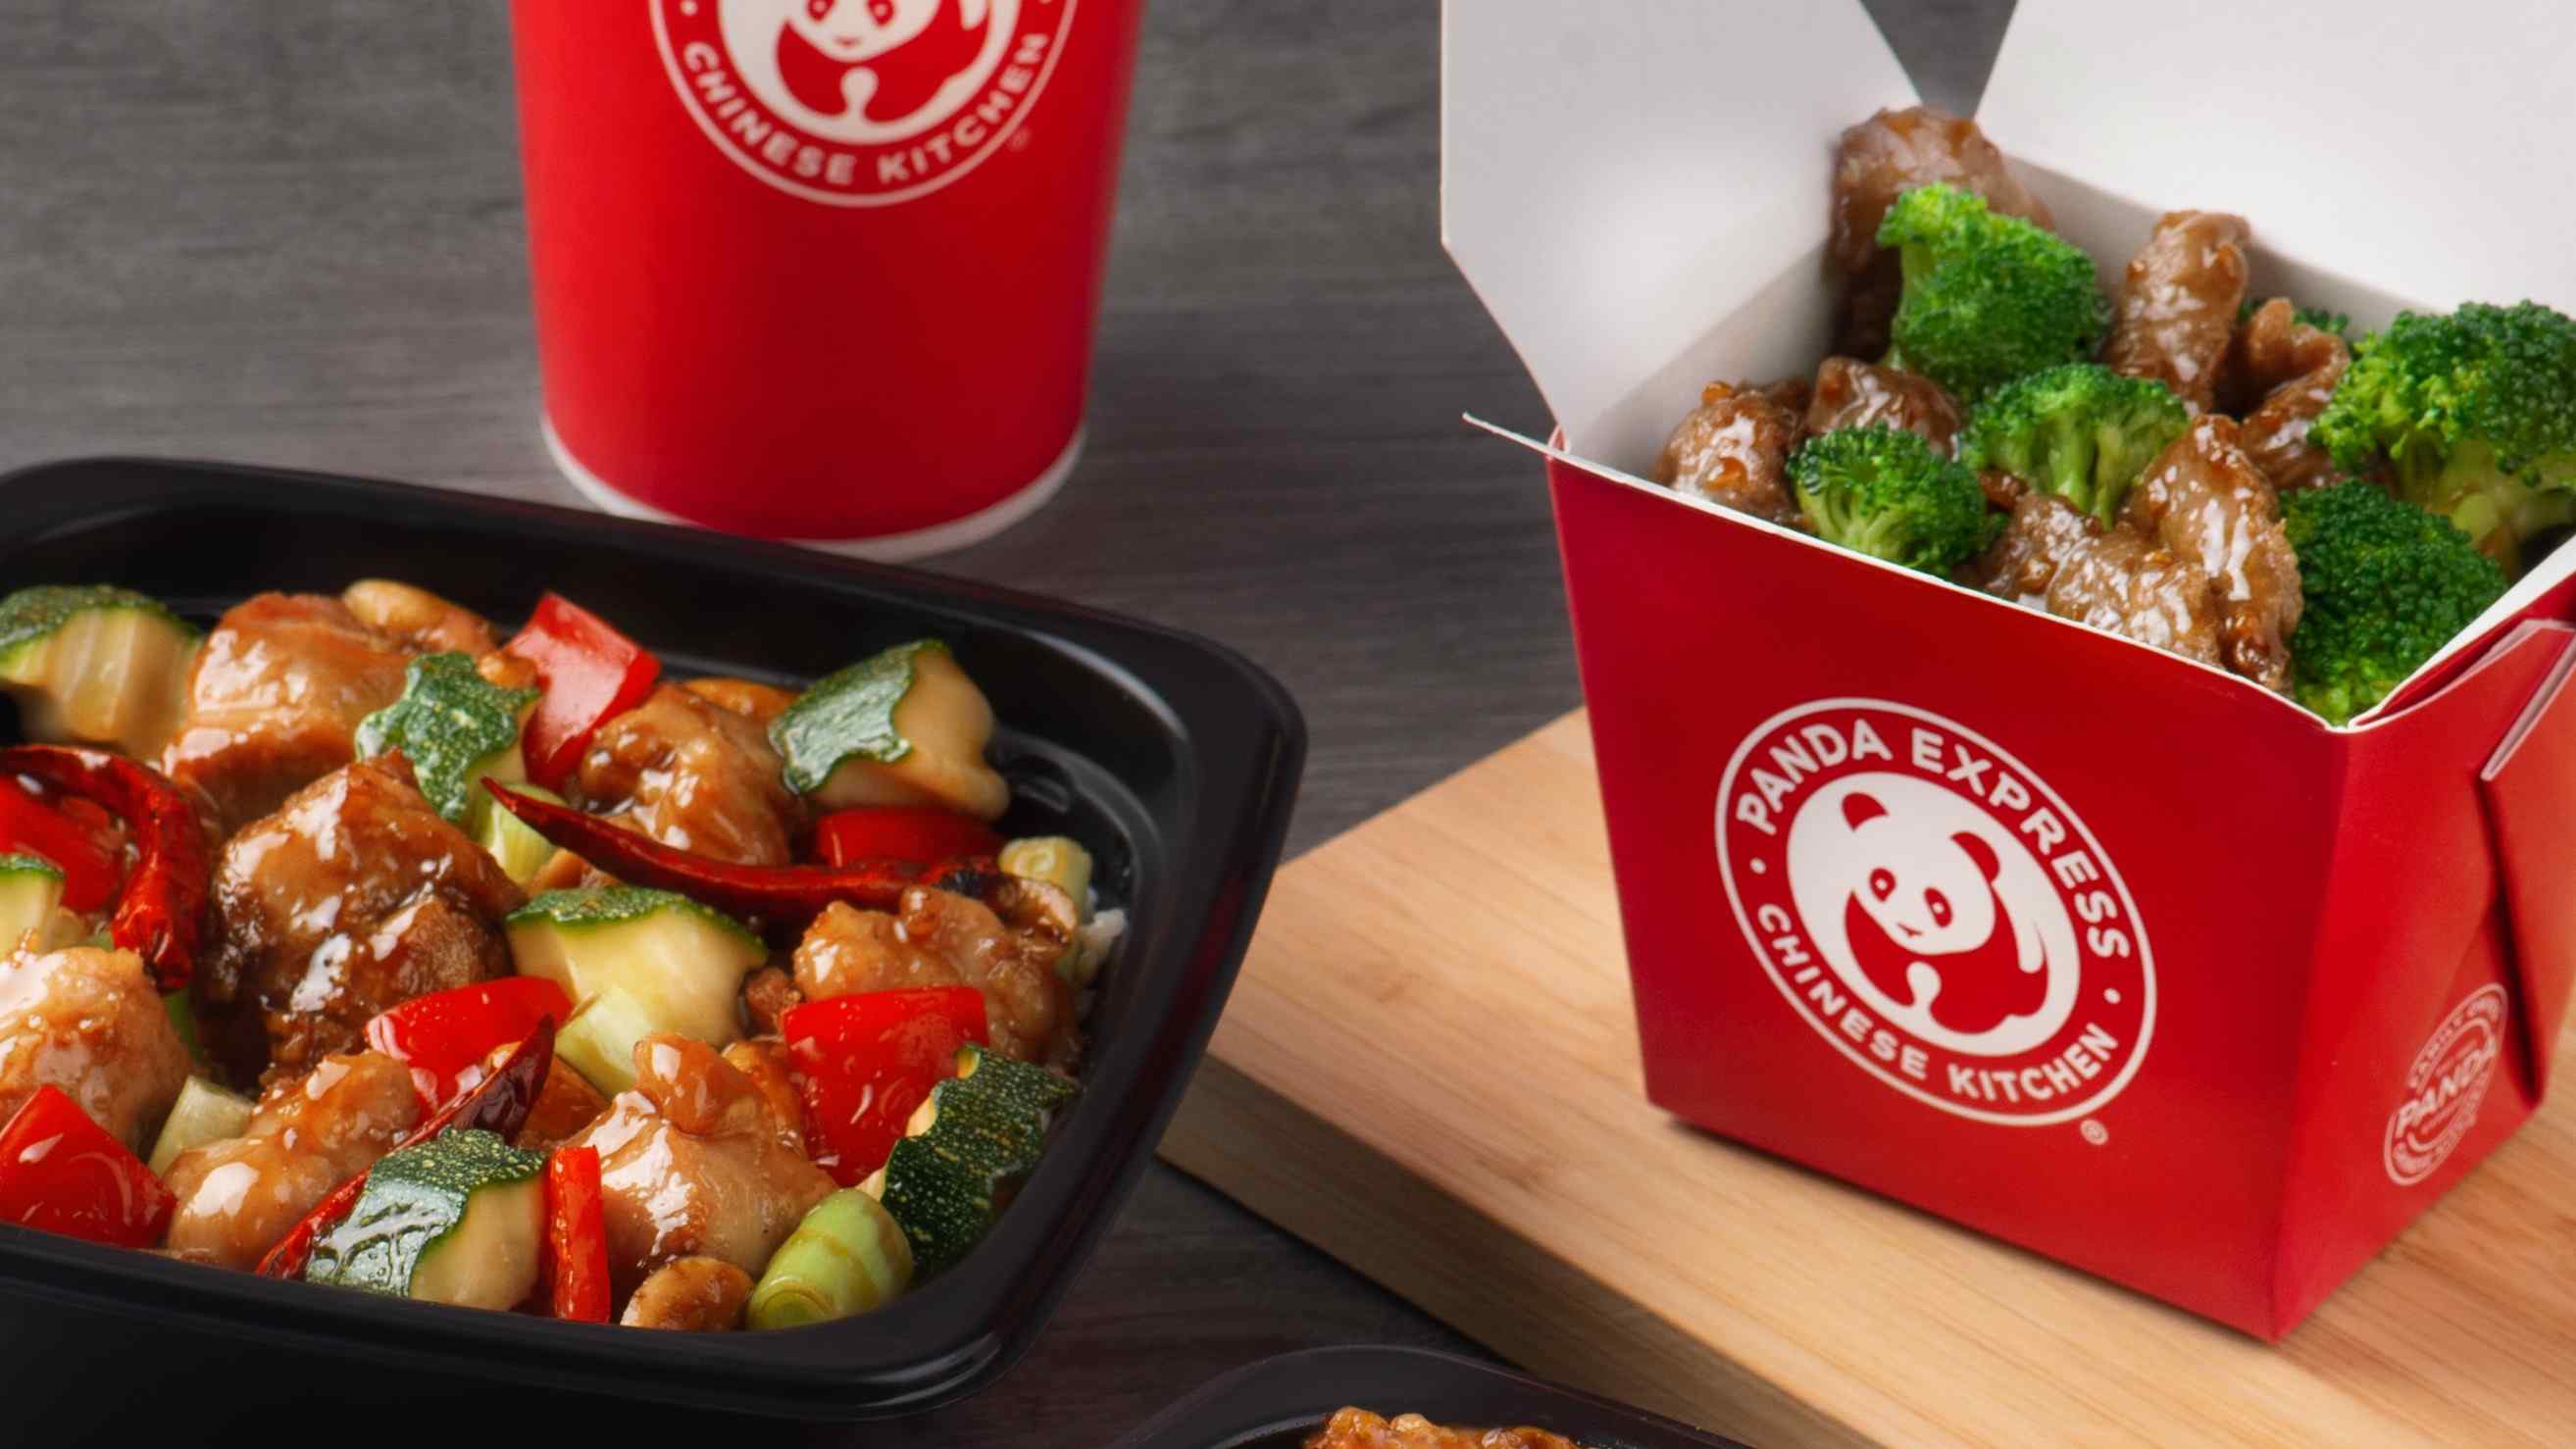 MANILA MENU. Panda Express revealed some of the dishes they'll be serving at their first Manila branch. Photo courtesy of Panda Express Philippines 